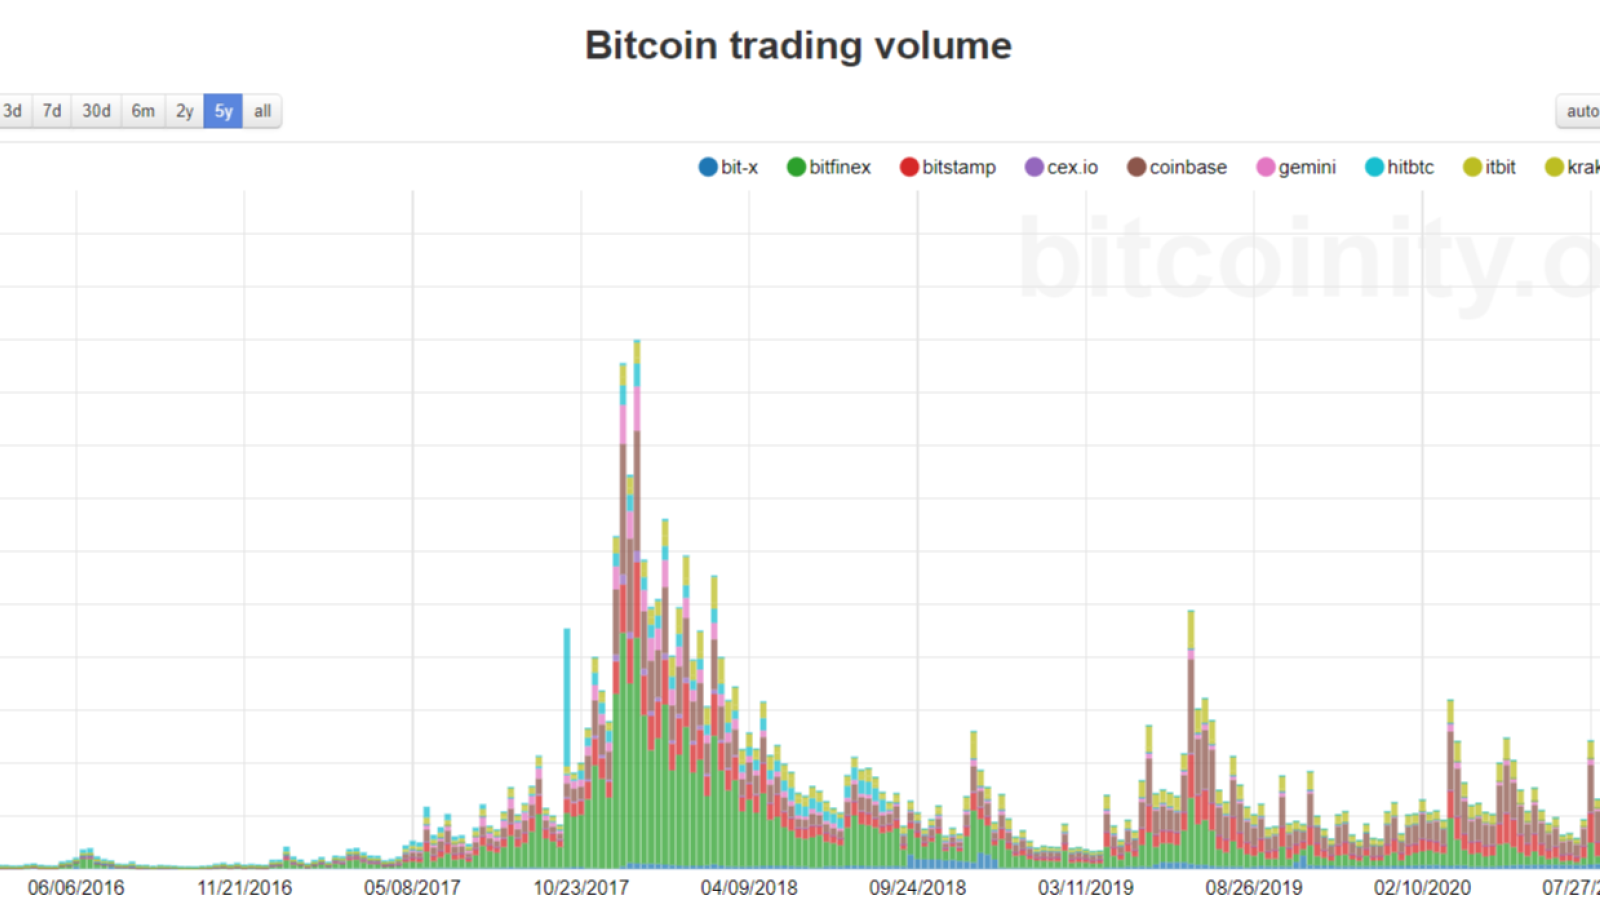 In December 2020, the spot trading volume for Bitcoin (BTC) smashed 2017’s highs // Image by Bitcoinity